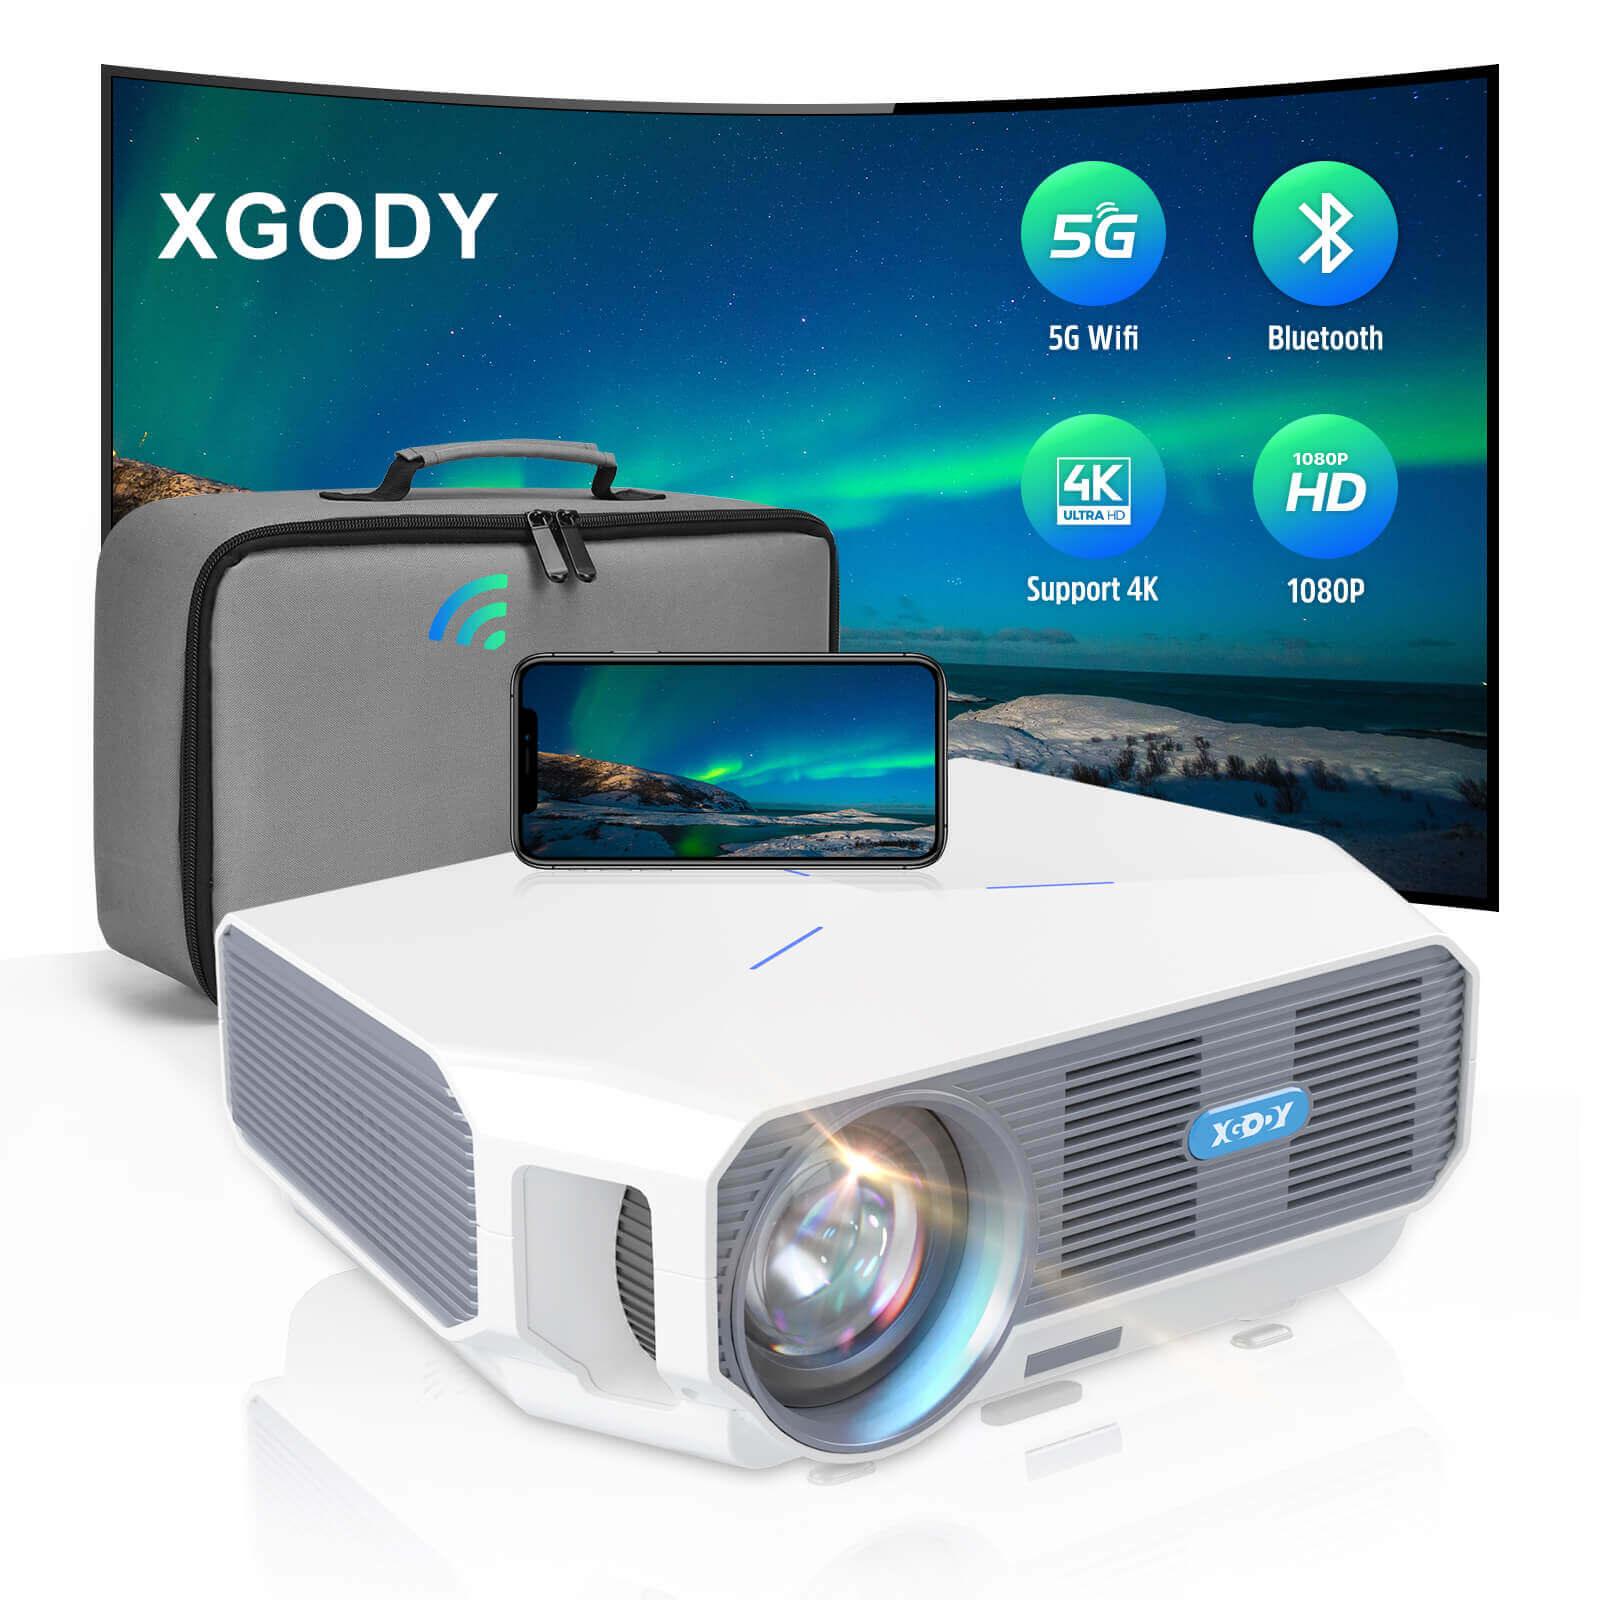 Cost-effective and Most worthwhile Native 1080P Full HD Video Projector | XGODY A4300  With WiFi & BT, Outdoor, Home Theater Projector - XGODY 